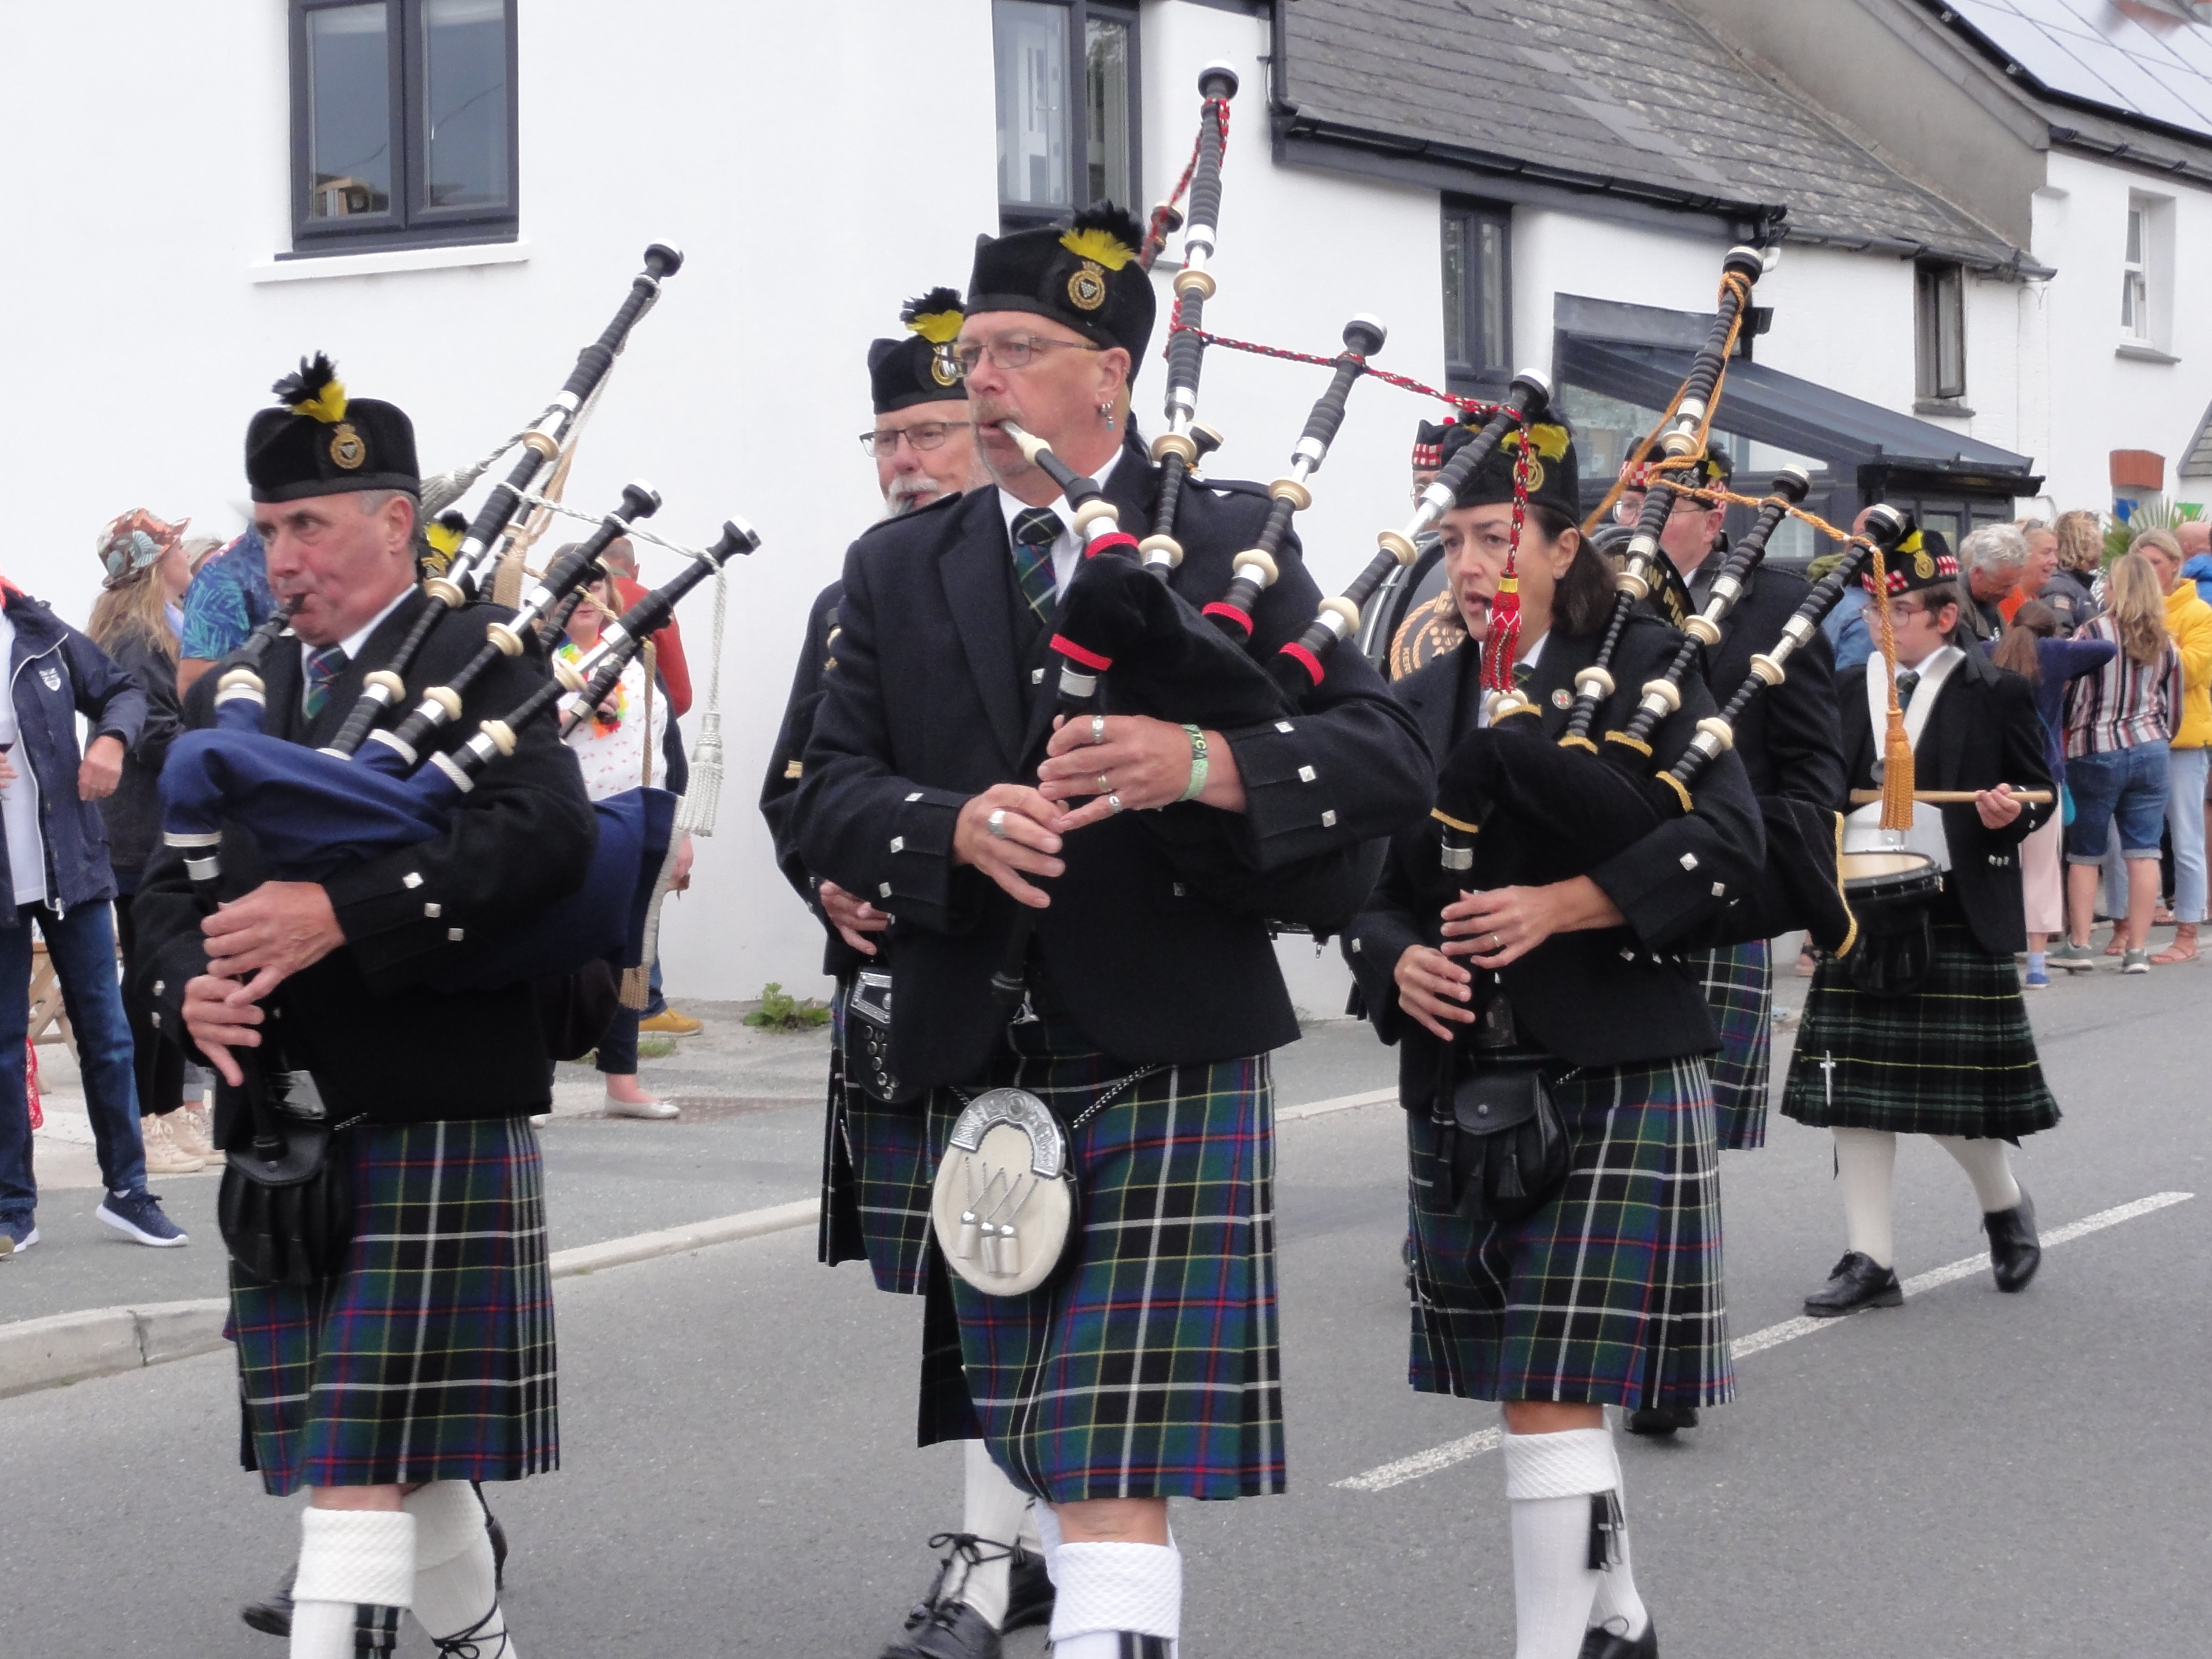 Kernow Pipes and Drums at St Merryn carnival 2019